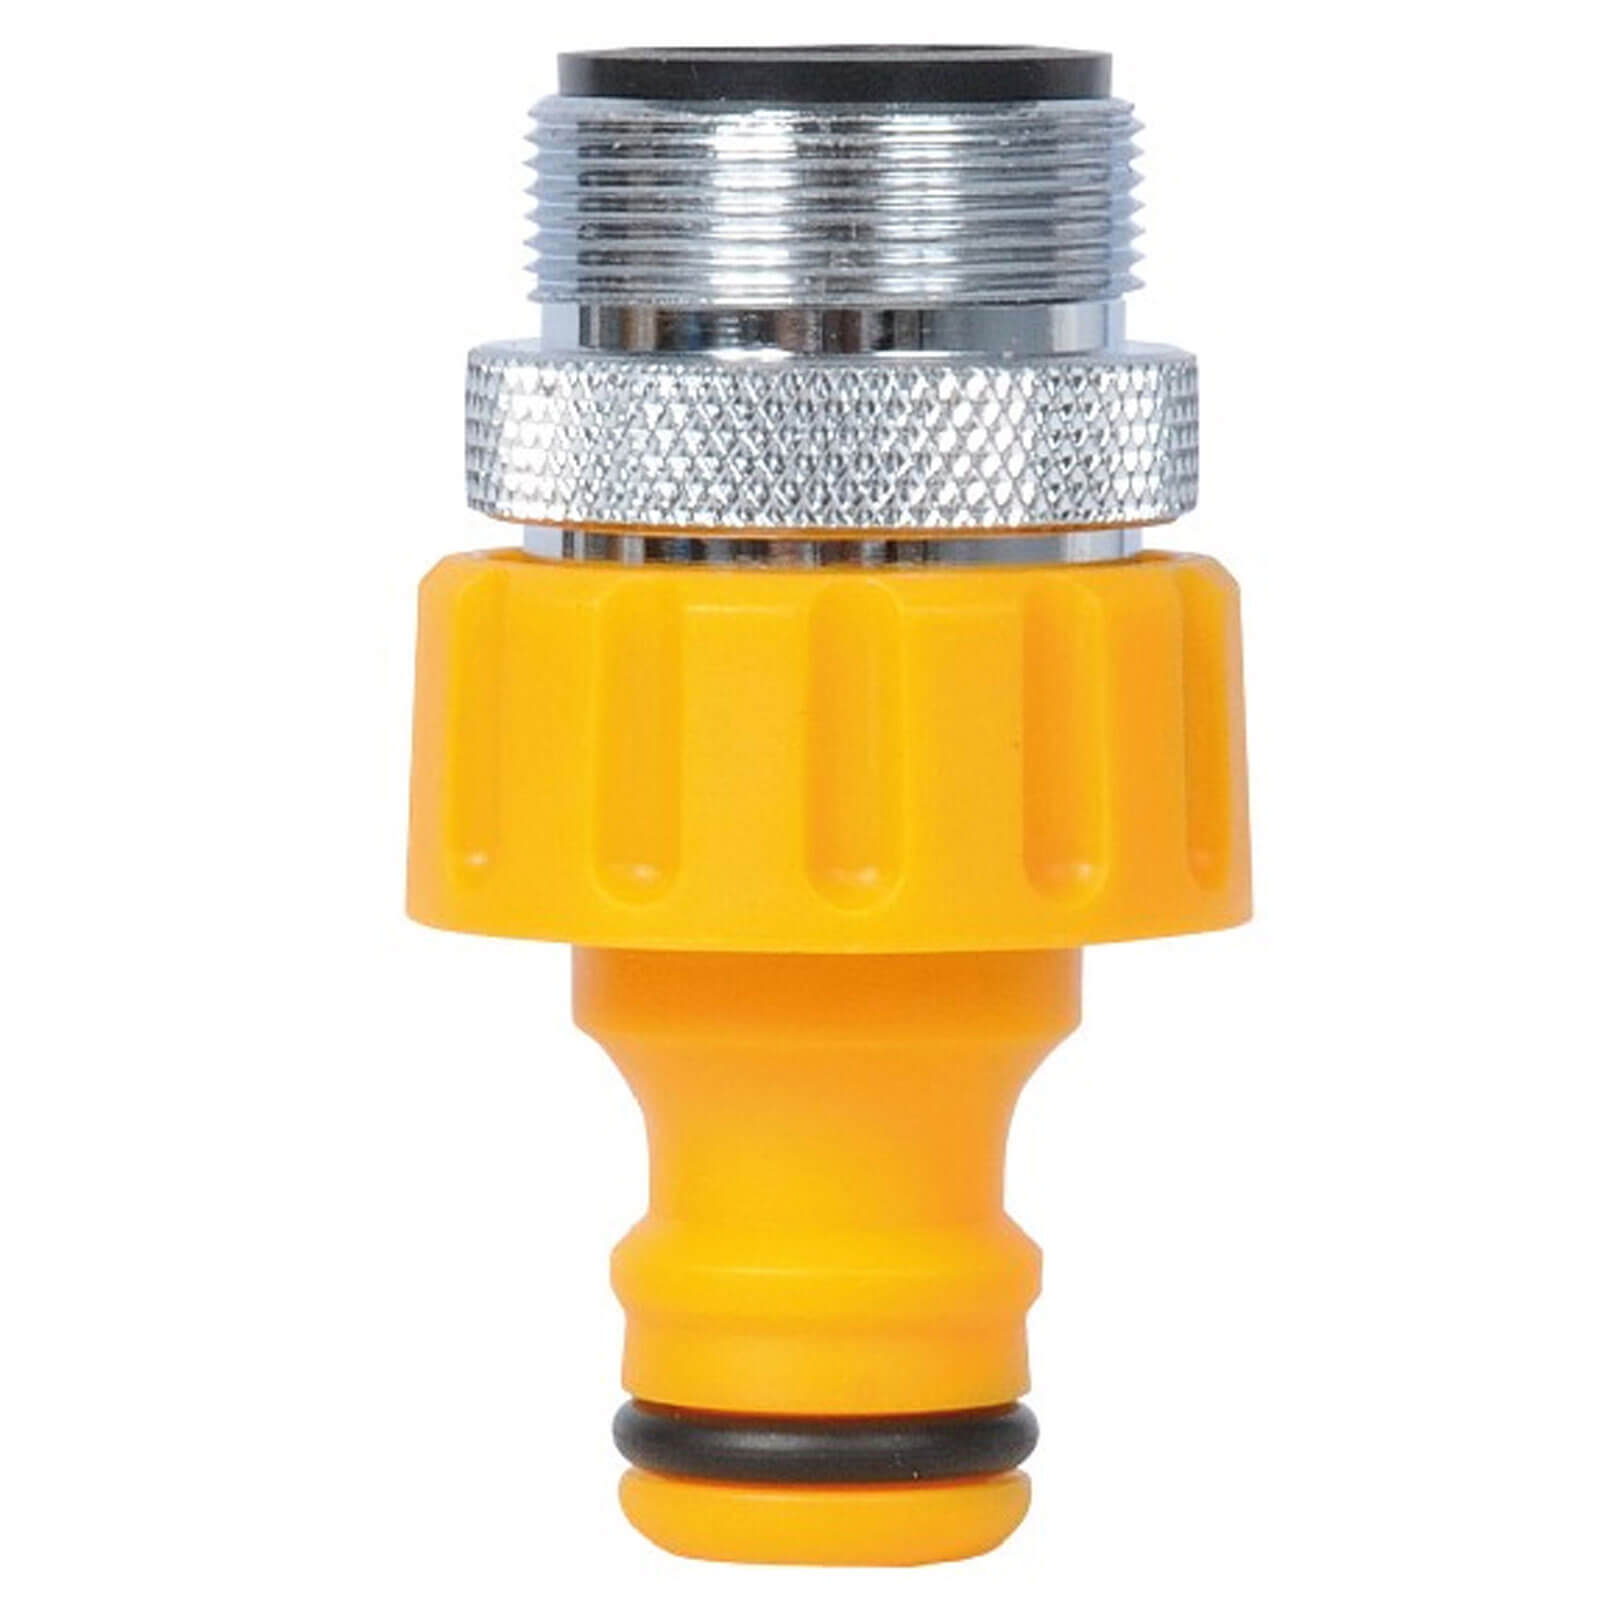 Image of Hozelock Aerator Head M24 Male Threaded Tap Hose Pipe Connector 24mm